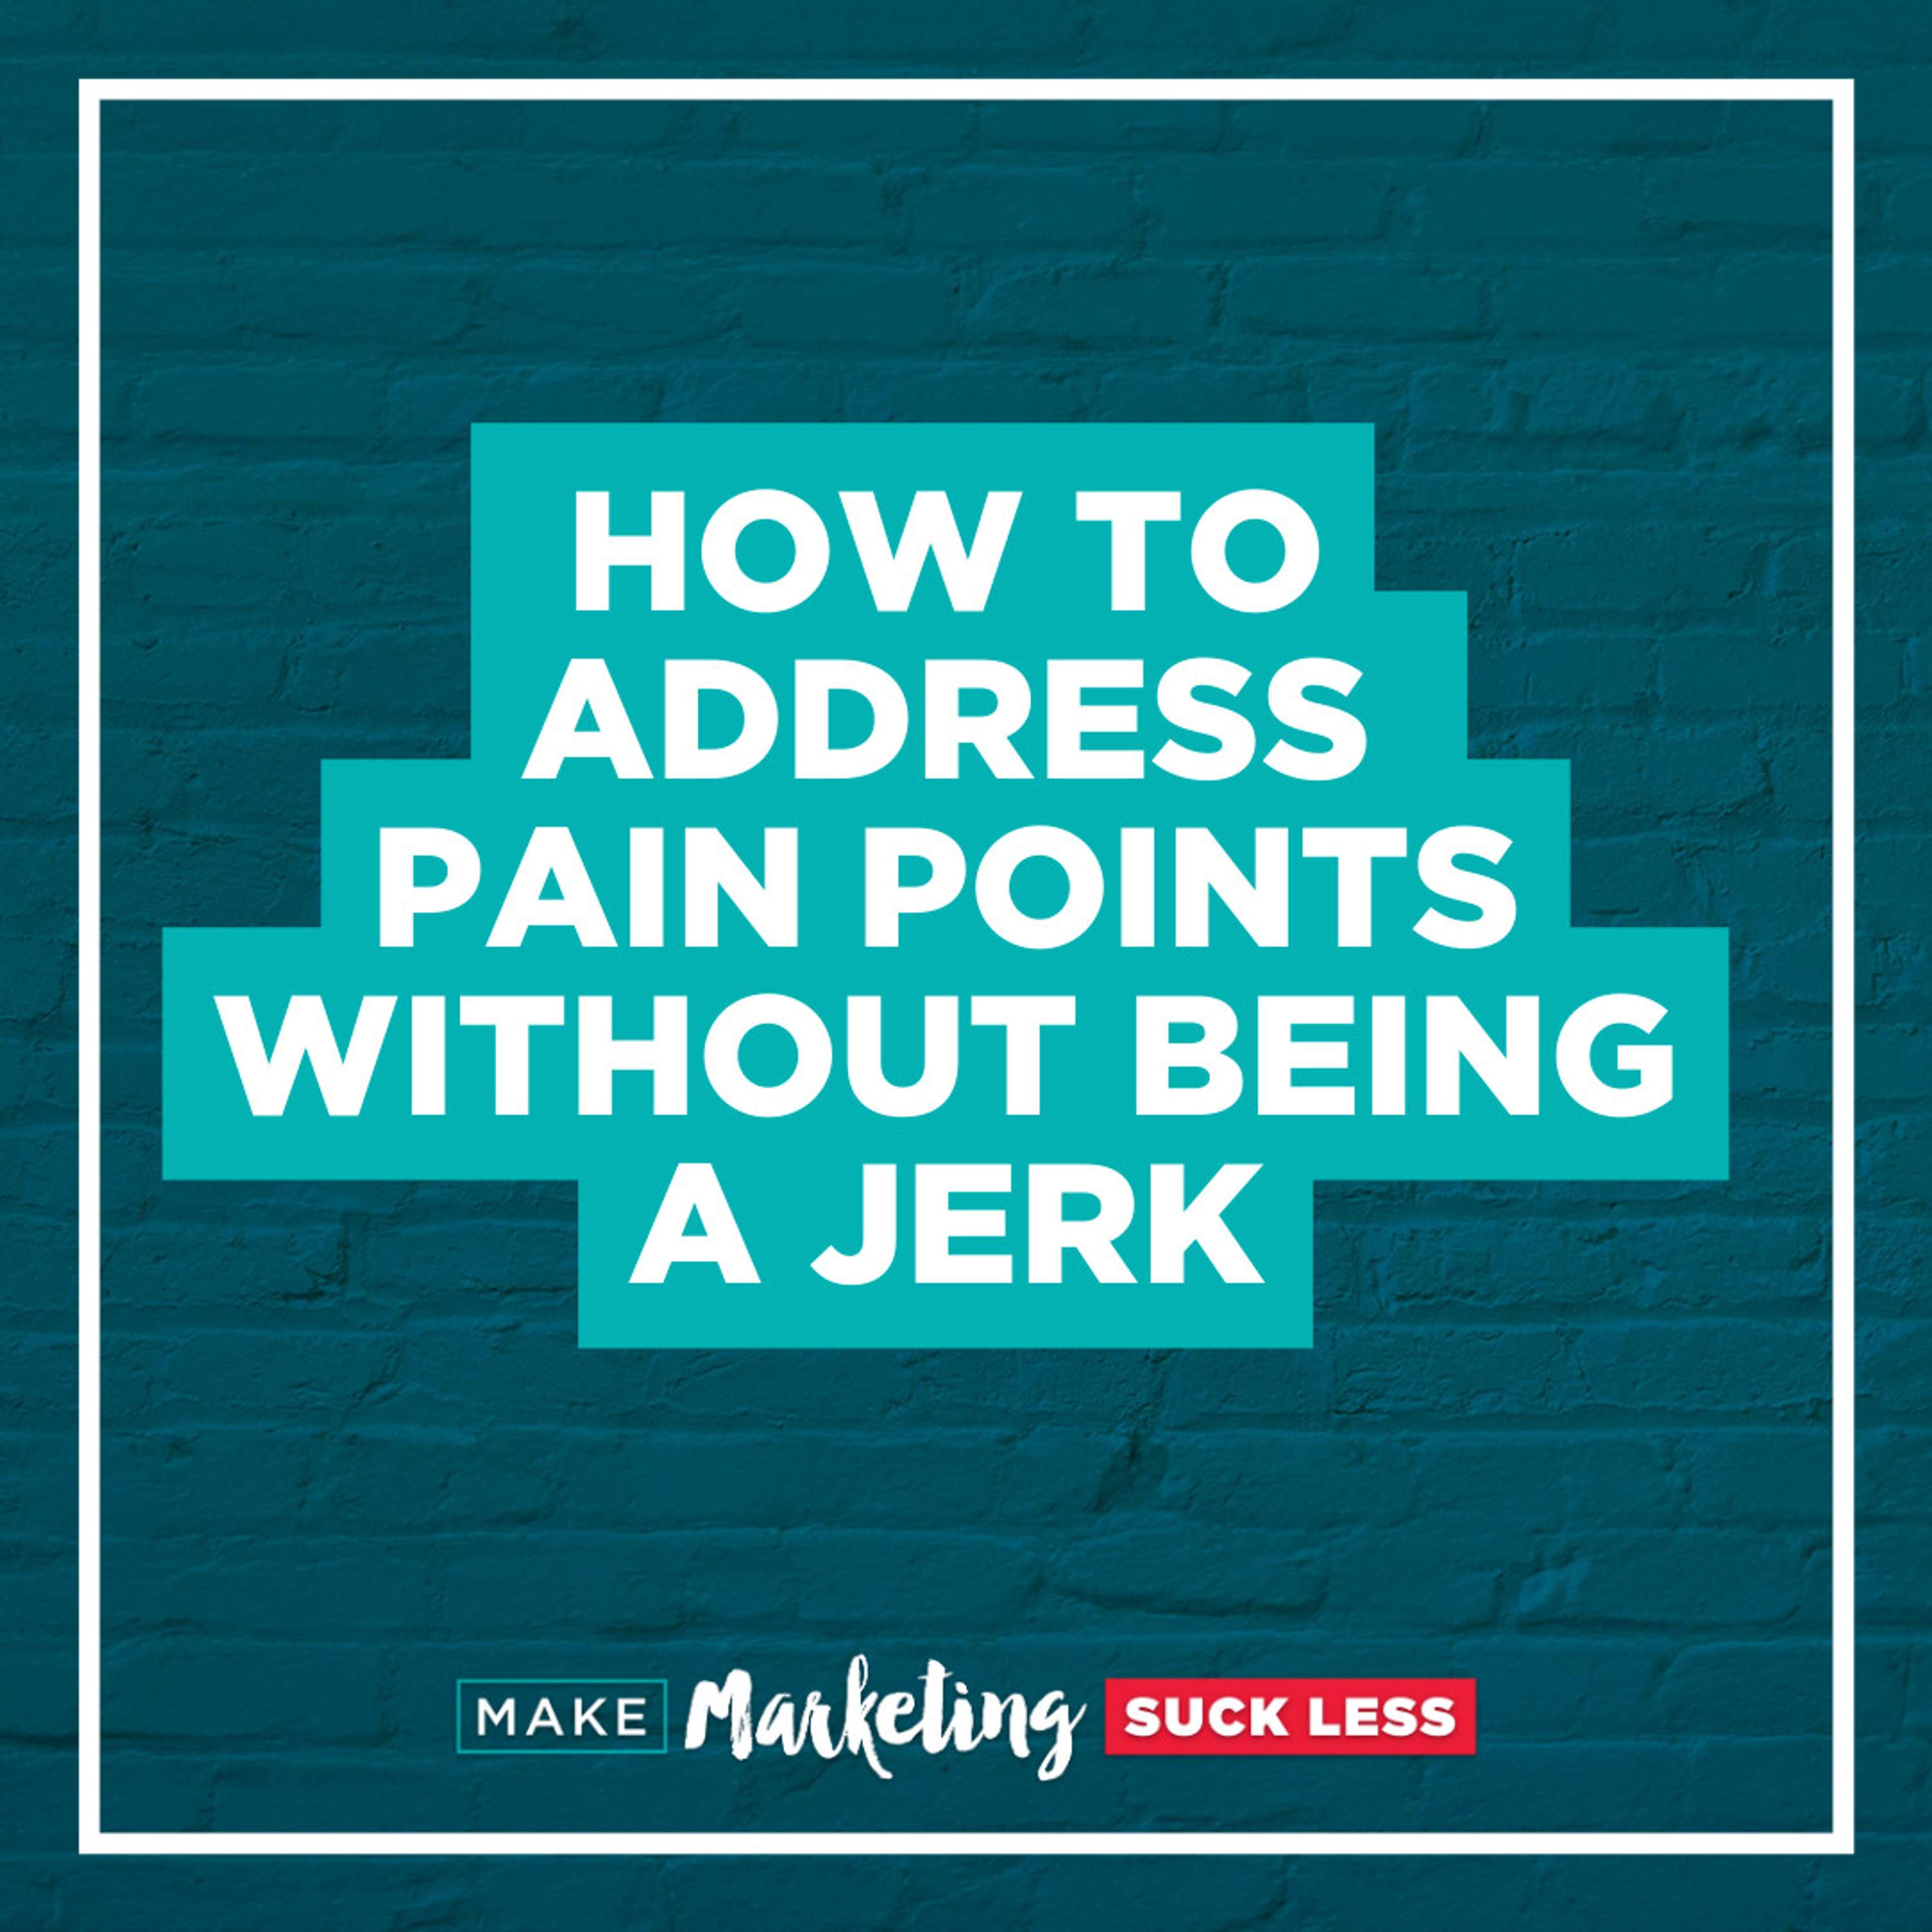 How To Address Pain Points Without Being A Jerk